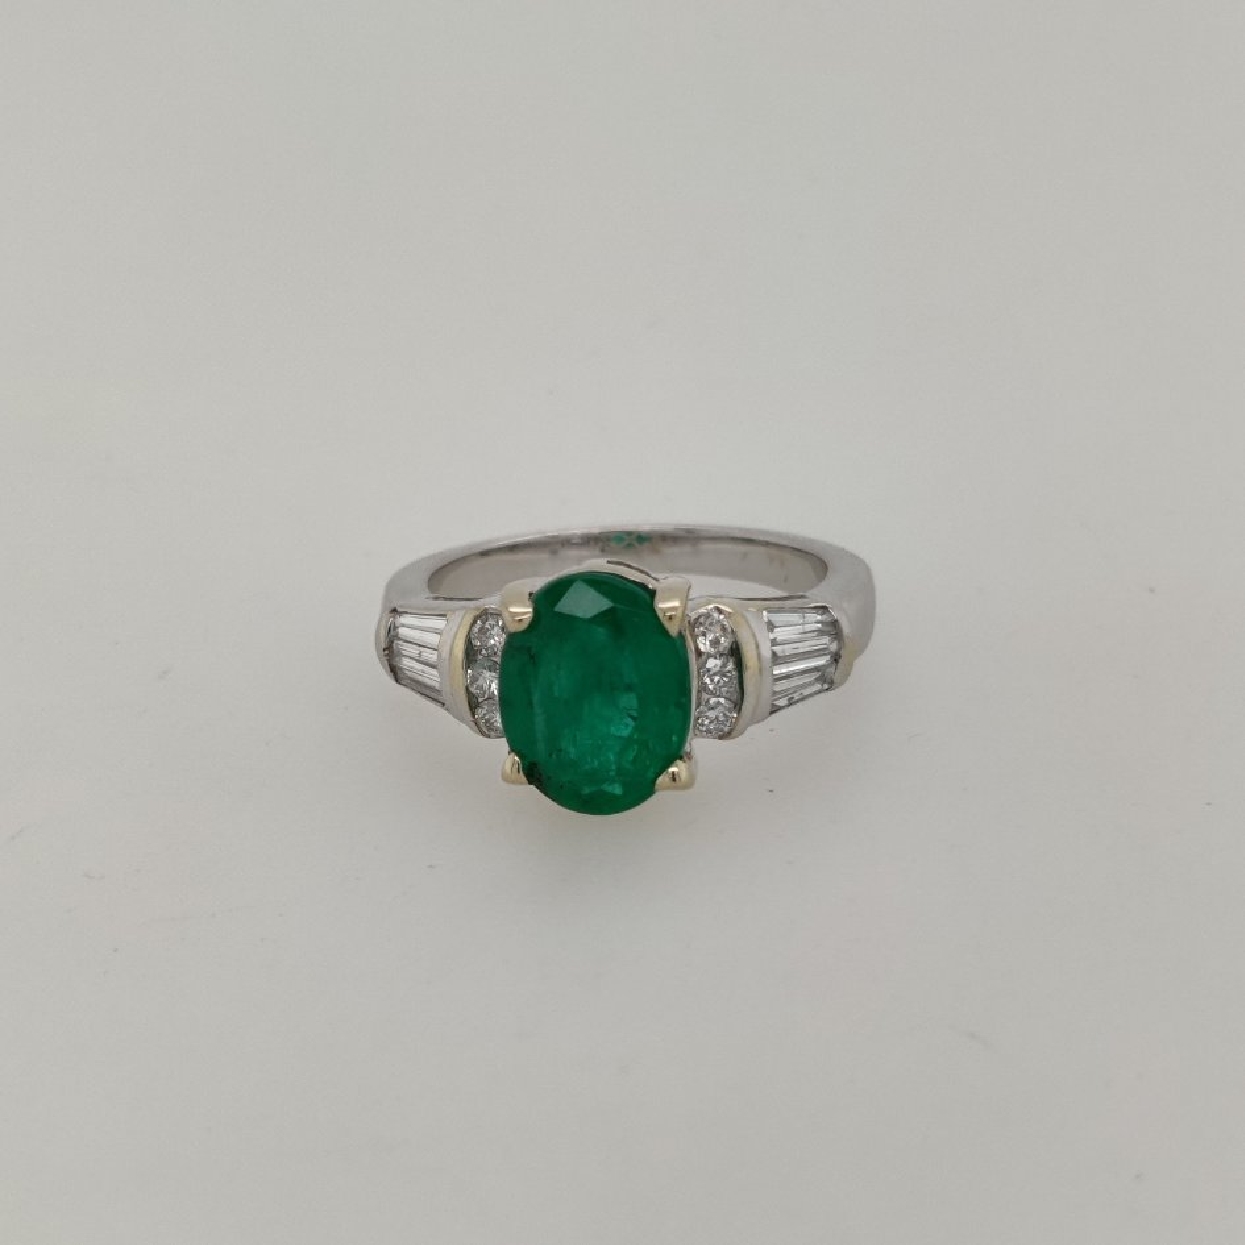 18k White Gold Emerald Ring with Round and Baguette Diamond Accents Size 6.75

Emerald is Approximately 2.40CT
Diamonds are Approximatel 0.50CTTW

6 Round Diamonds weigh Approximately 0.18CTTW
4 Baguettes weigh Approximately 0.32CTTW